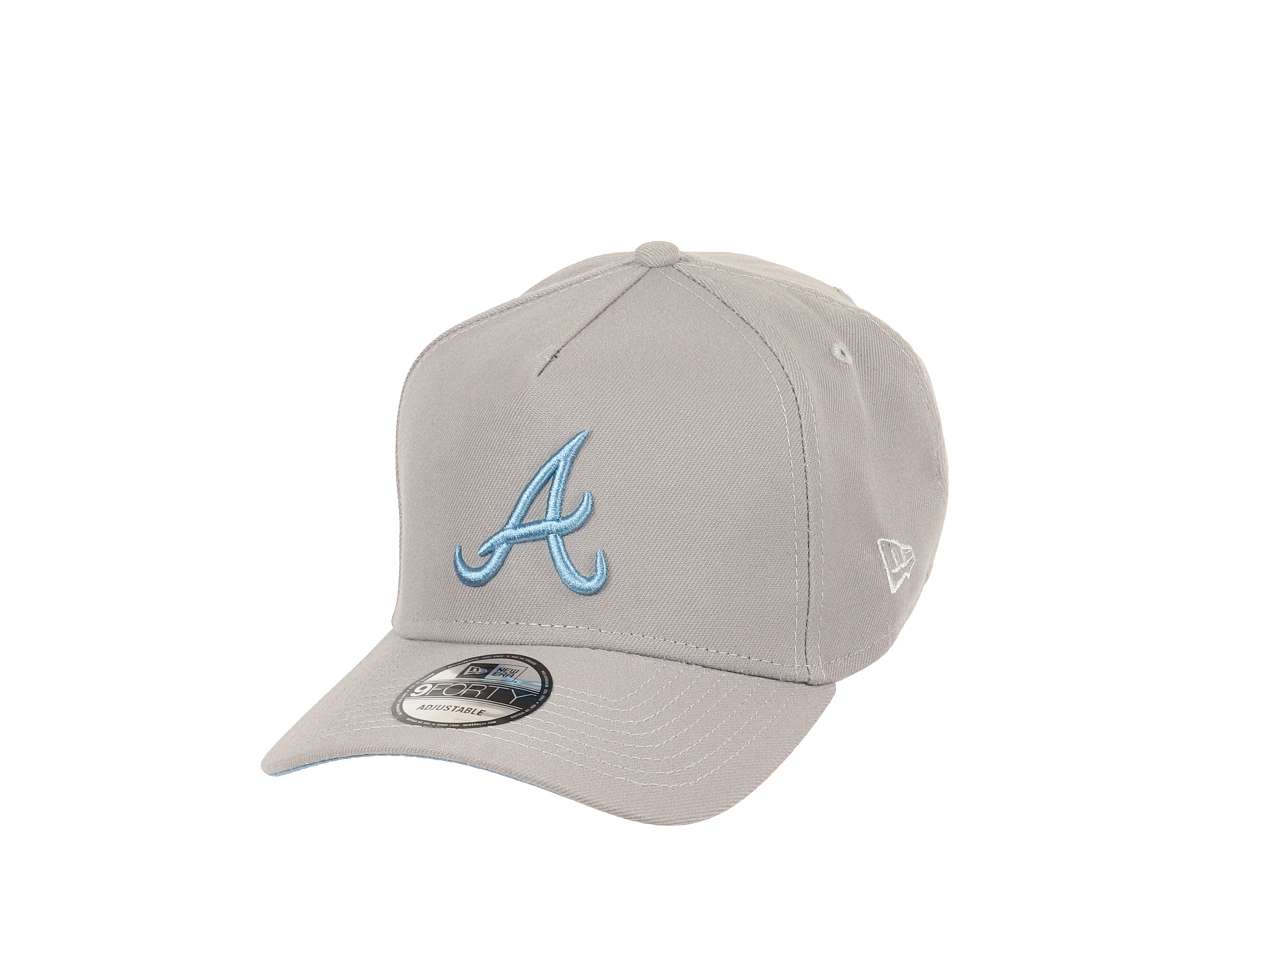 Atlanta Braves MLB World Series 1995 Sidepatch Cooperstown Gray Sky 9Forty A-Frame Snapback Cap New Era